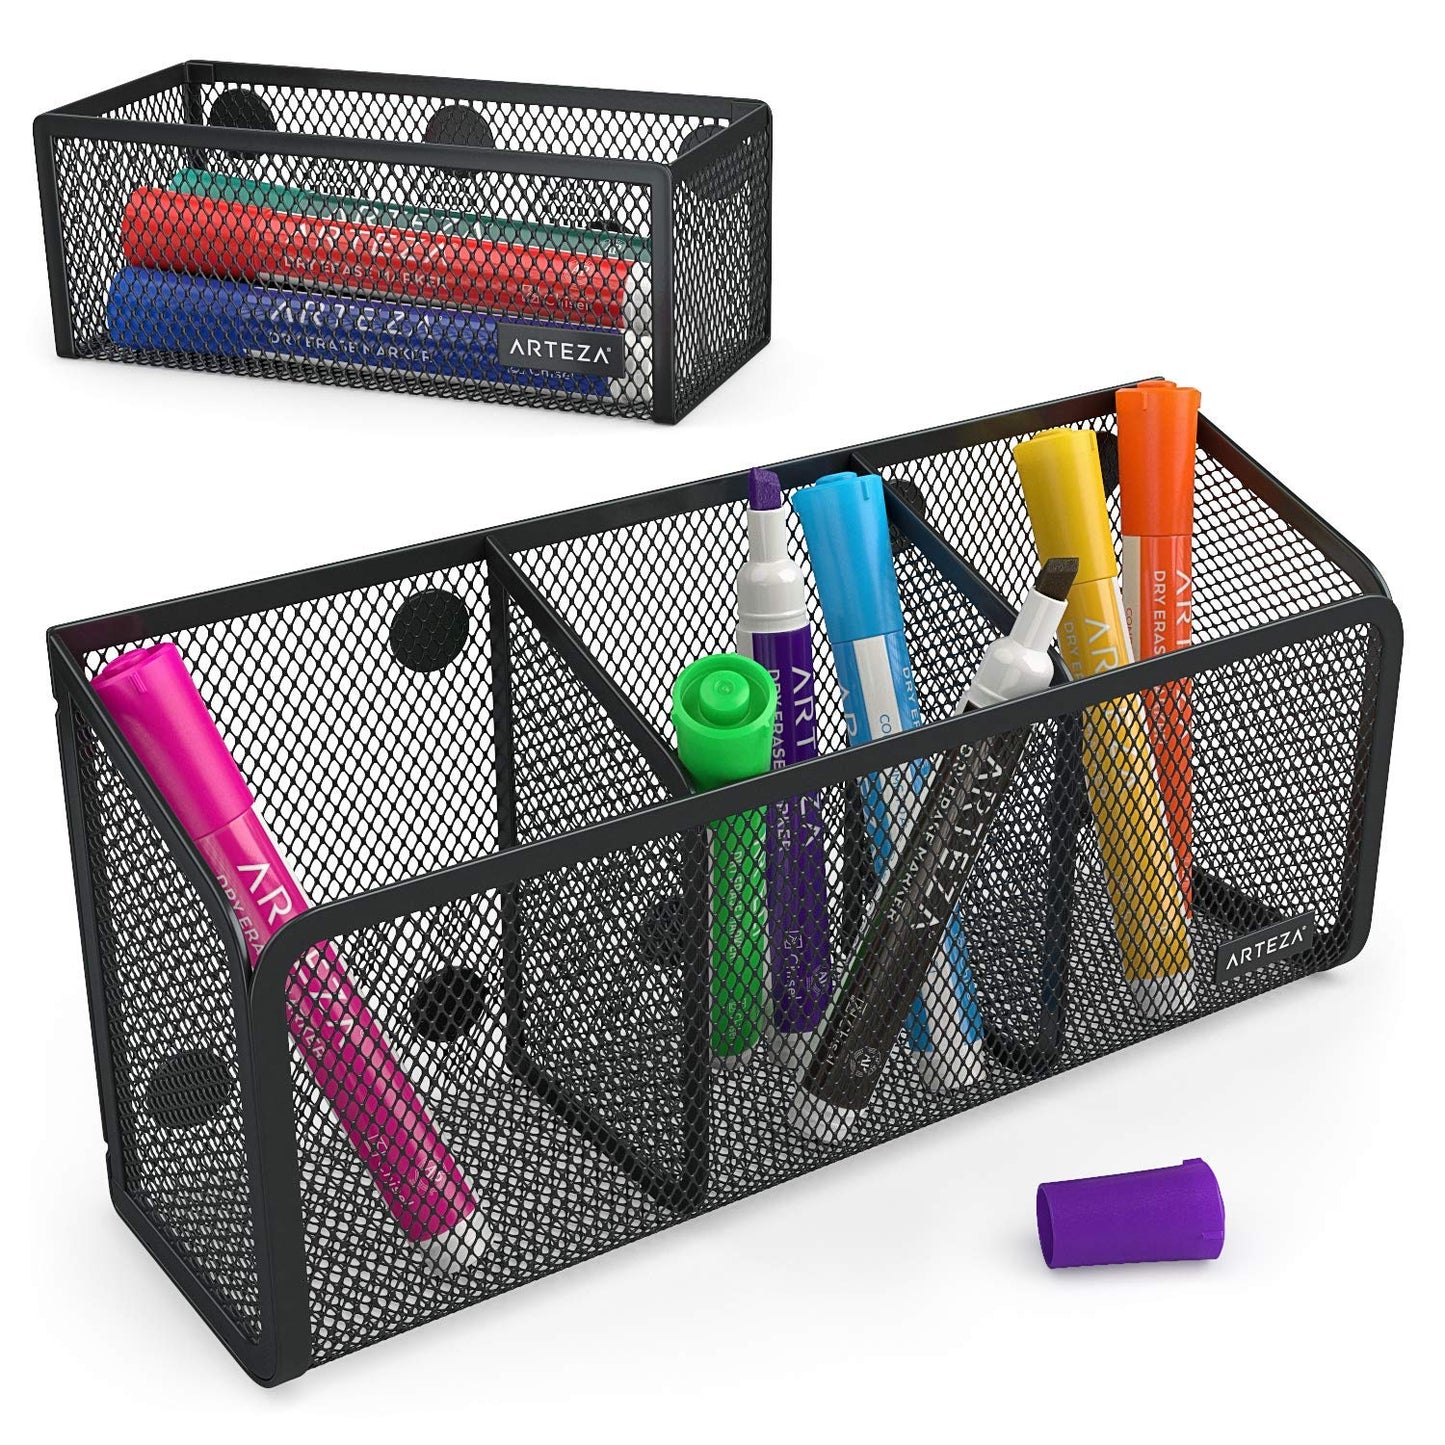 Arteza Mesh Magnetic Organizers - Set of 2 & 12 Dry-Erase Markers